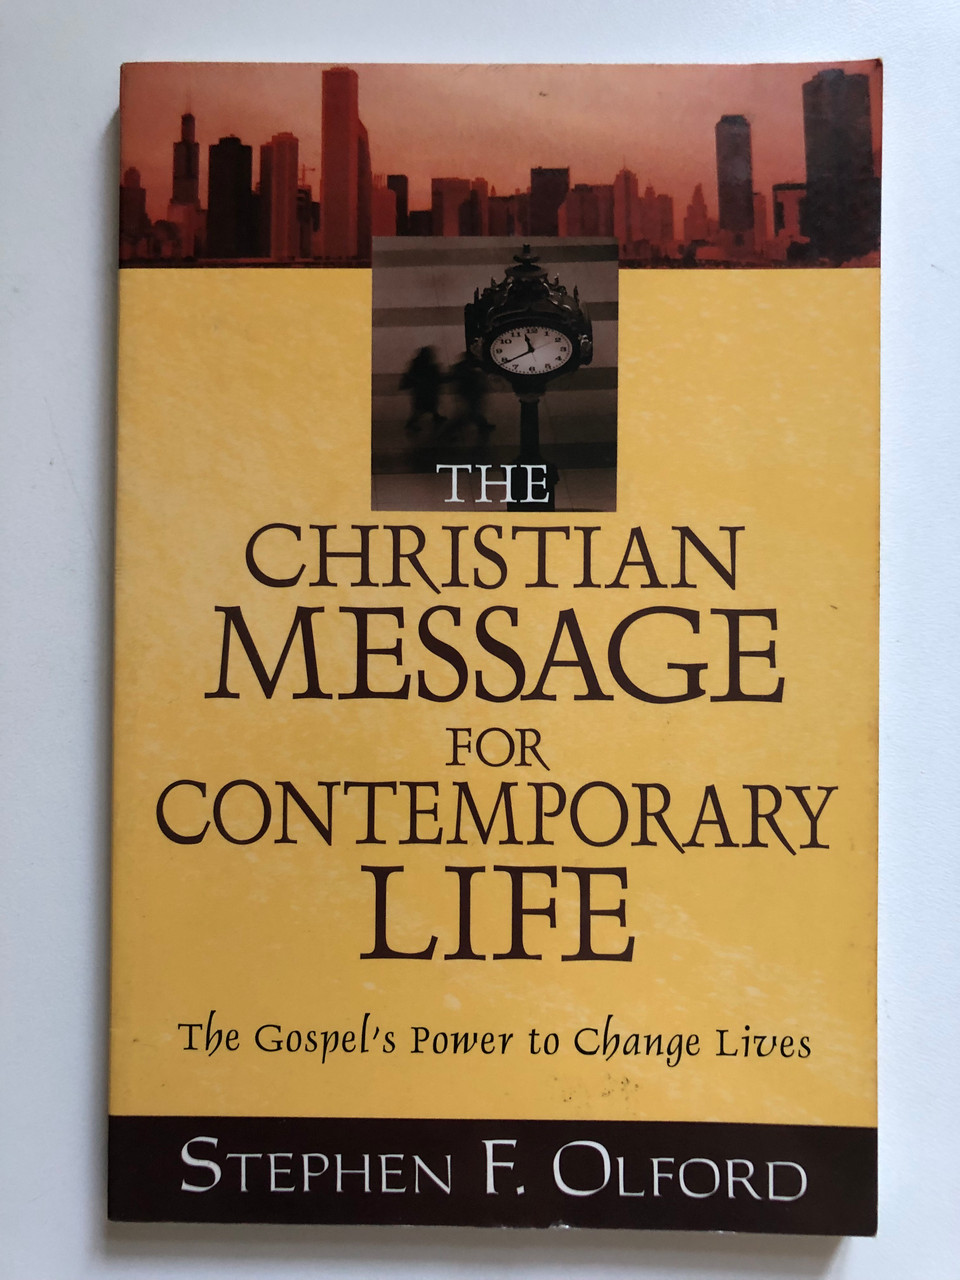 Christian_Message_for_Contemporary_Life_by_Stephen_F._Olford_The_Gospels_Power_to_Change_Lives_Christian_Living-Evangelism_Publisher_kregel_PUBLICATIONS_2__88538.1691301180.1280.1280.JPG (960×1280)